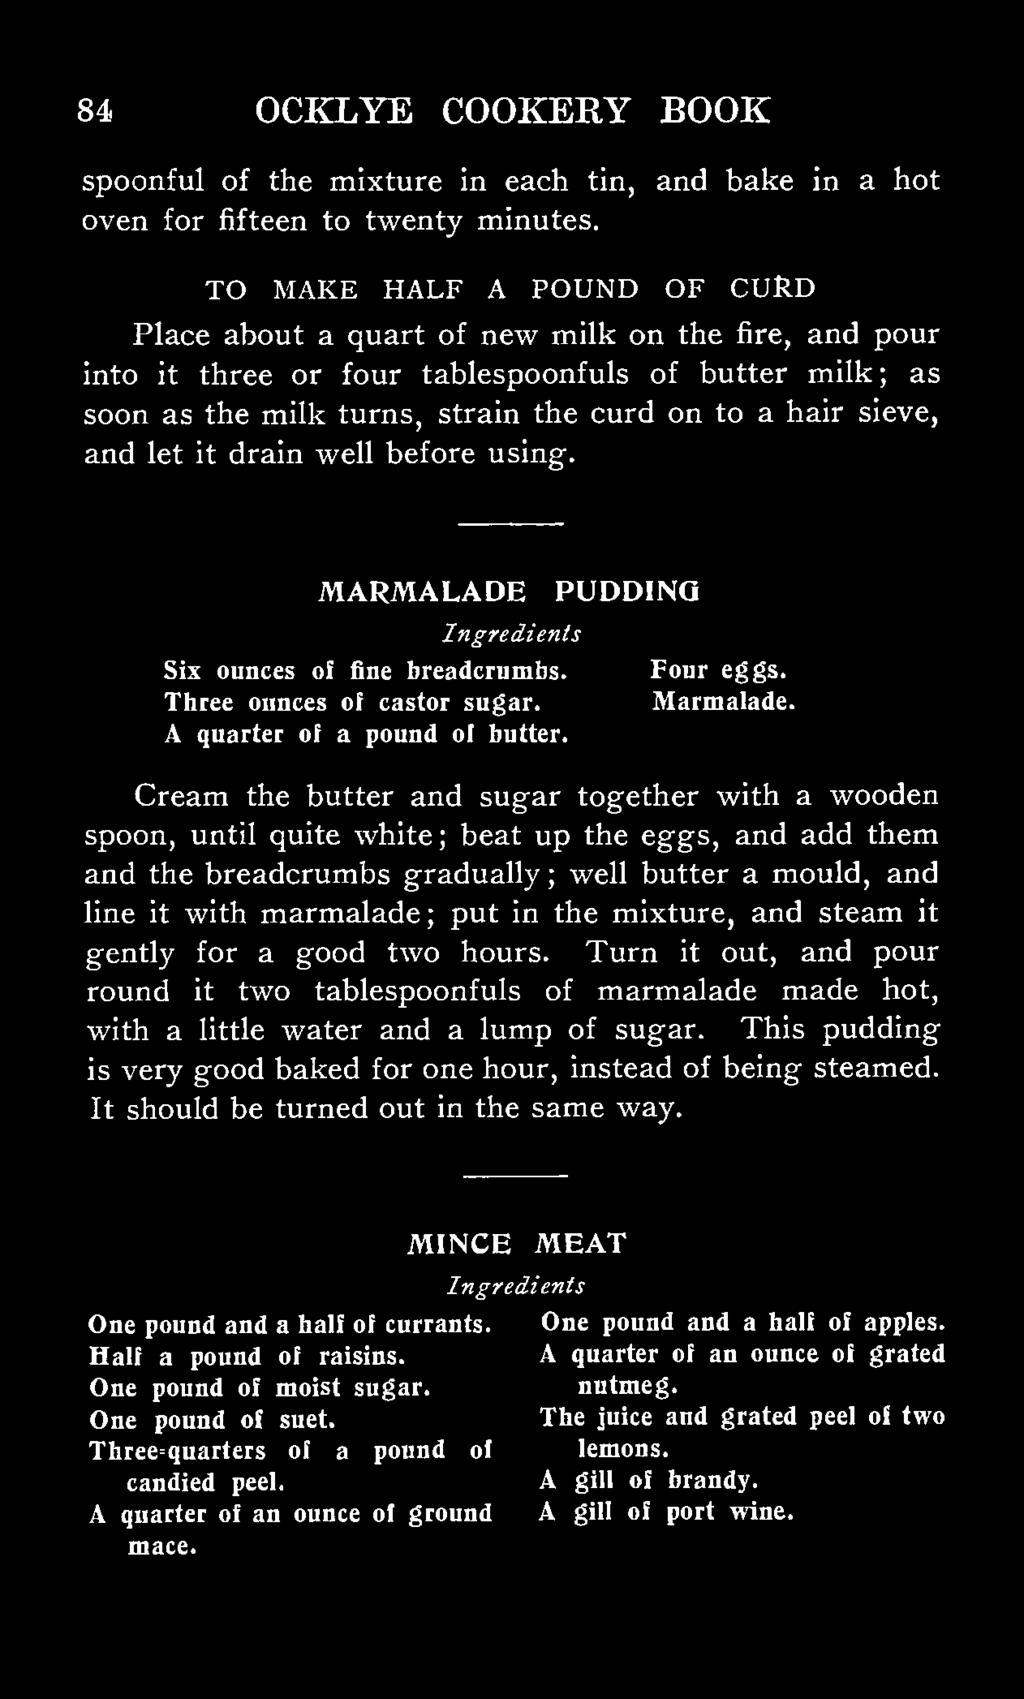 and let it drain well before using. MARMALADE PUDDING Six ounces of fine breadcrumbs. Four eggs. Three ounces of castor sugar. Marmalade. A quarter of a pound of butter.